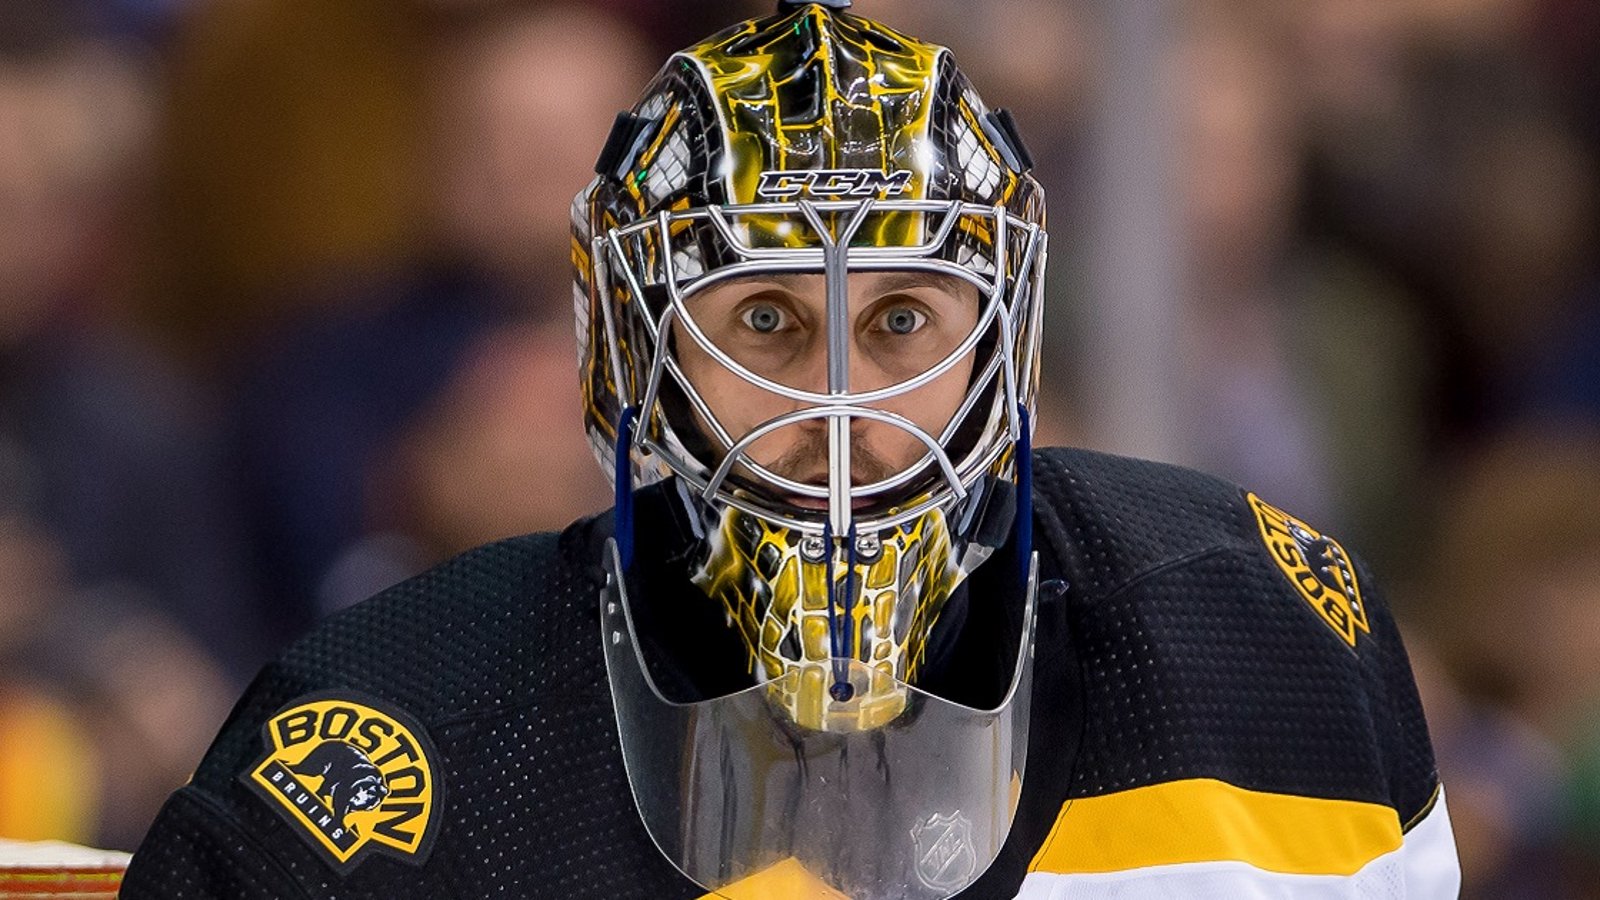 Goaltender controversy may be brewing in Boston.